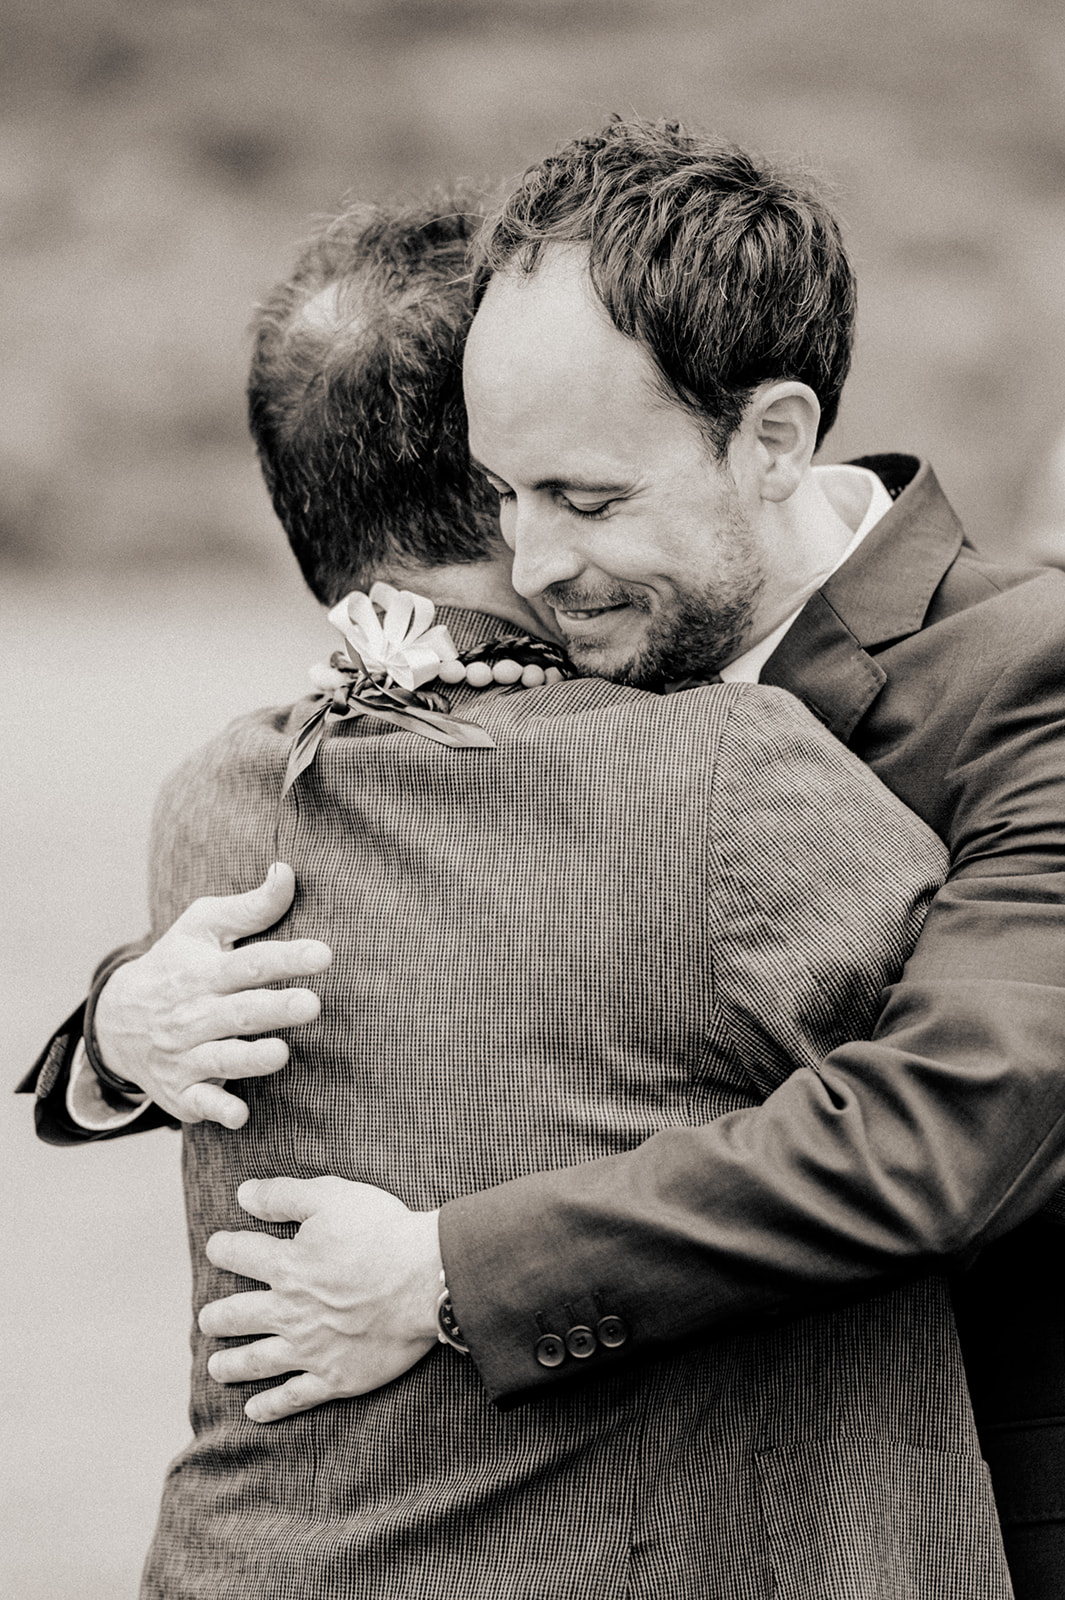 Emotional embrace between the groom and the bride's father L Hewitt Photography